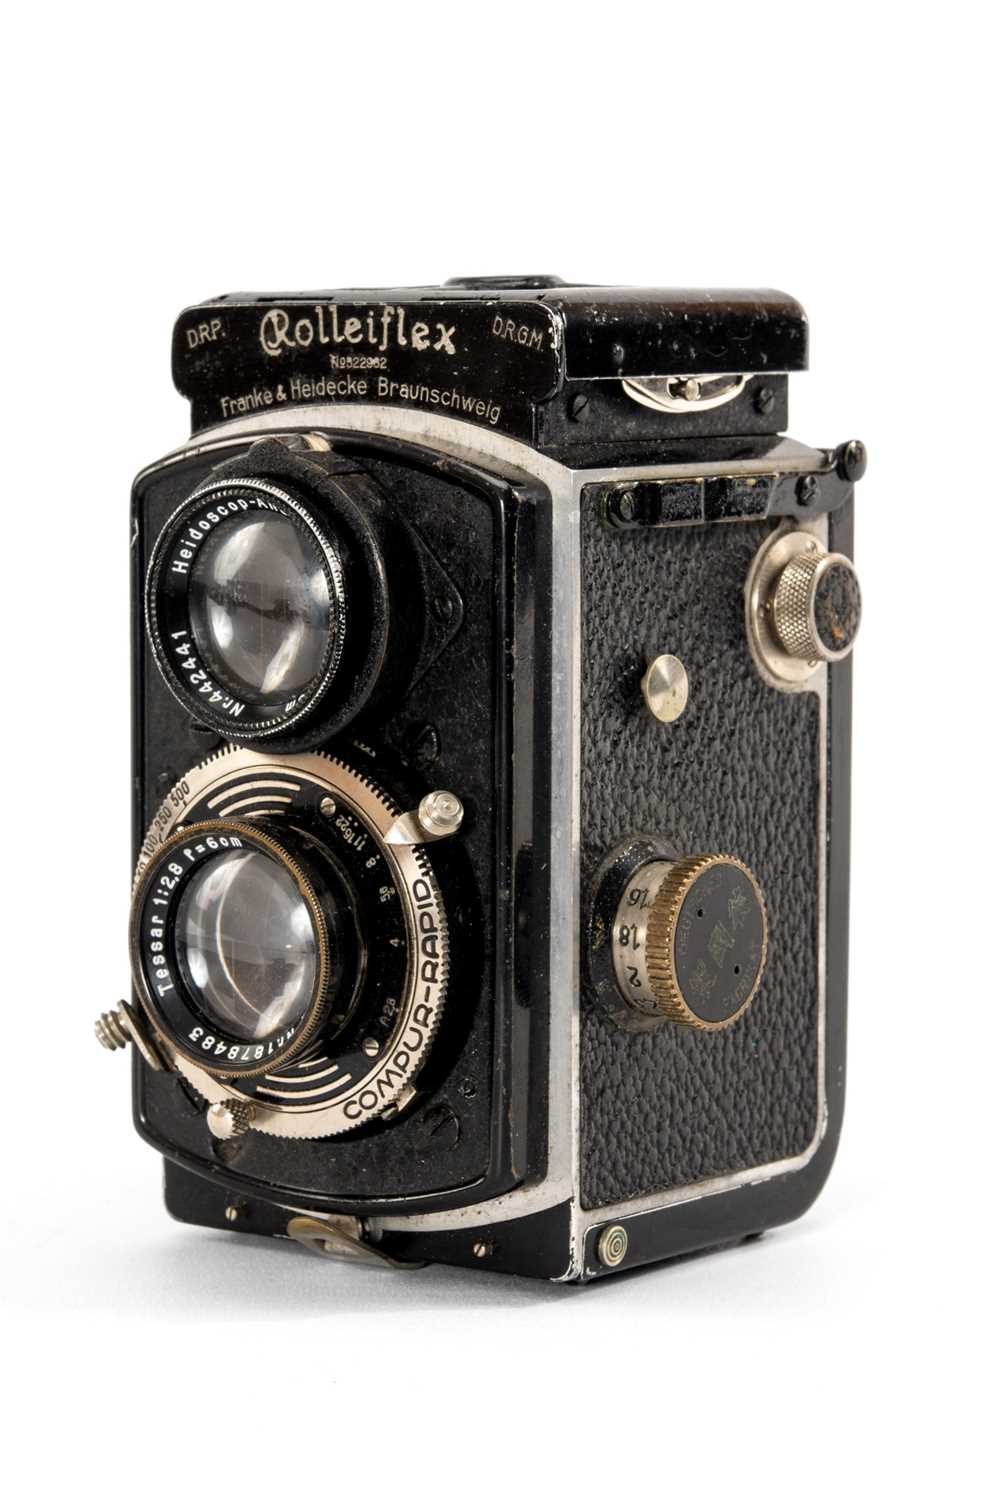 A BABY ROLLEIFLEX 2.8F TLR CAMERA - black, serial no. 5189268, with a Carl Zeiss Jena Tessar f/2.8 - Image 2 of 2